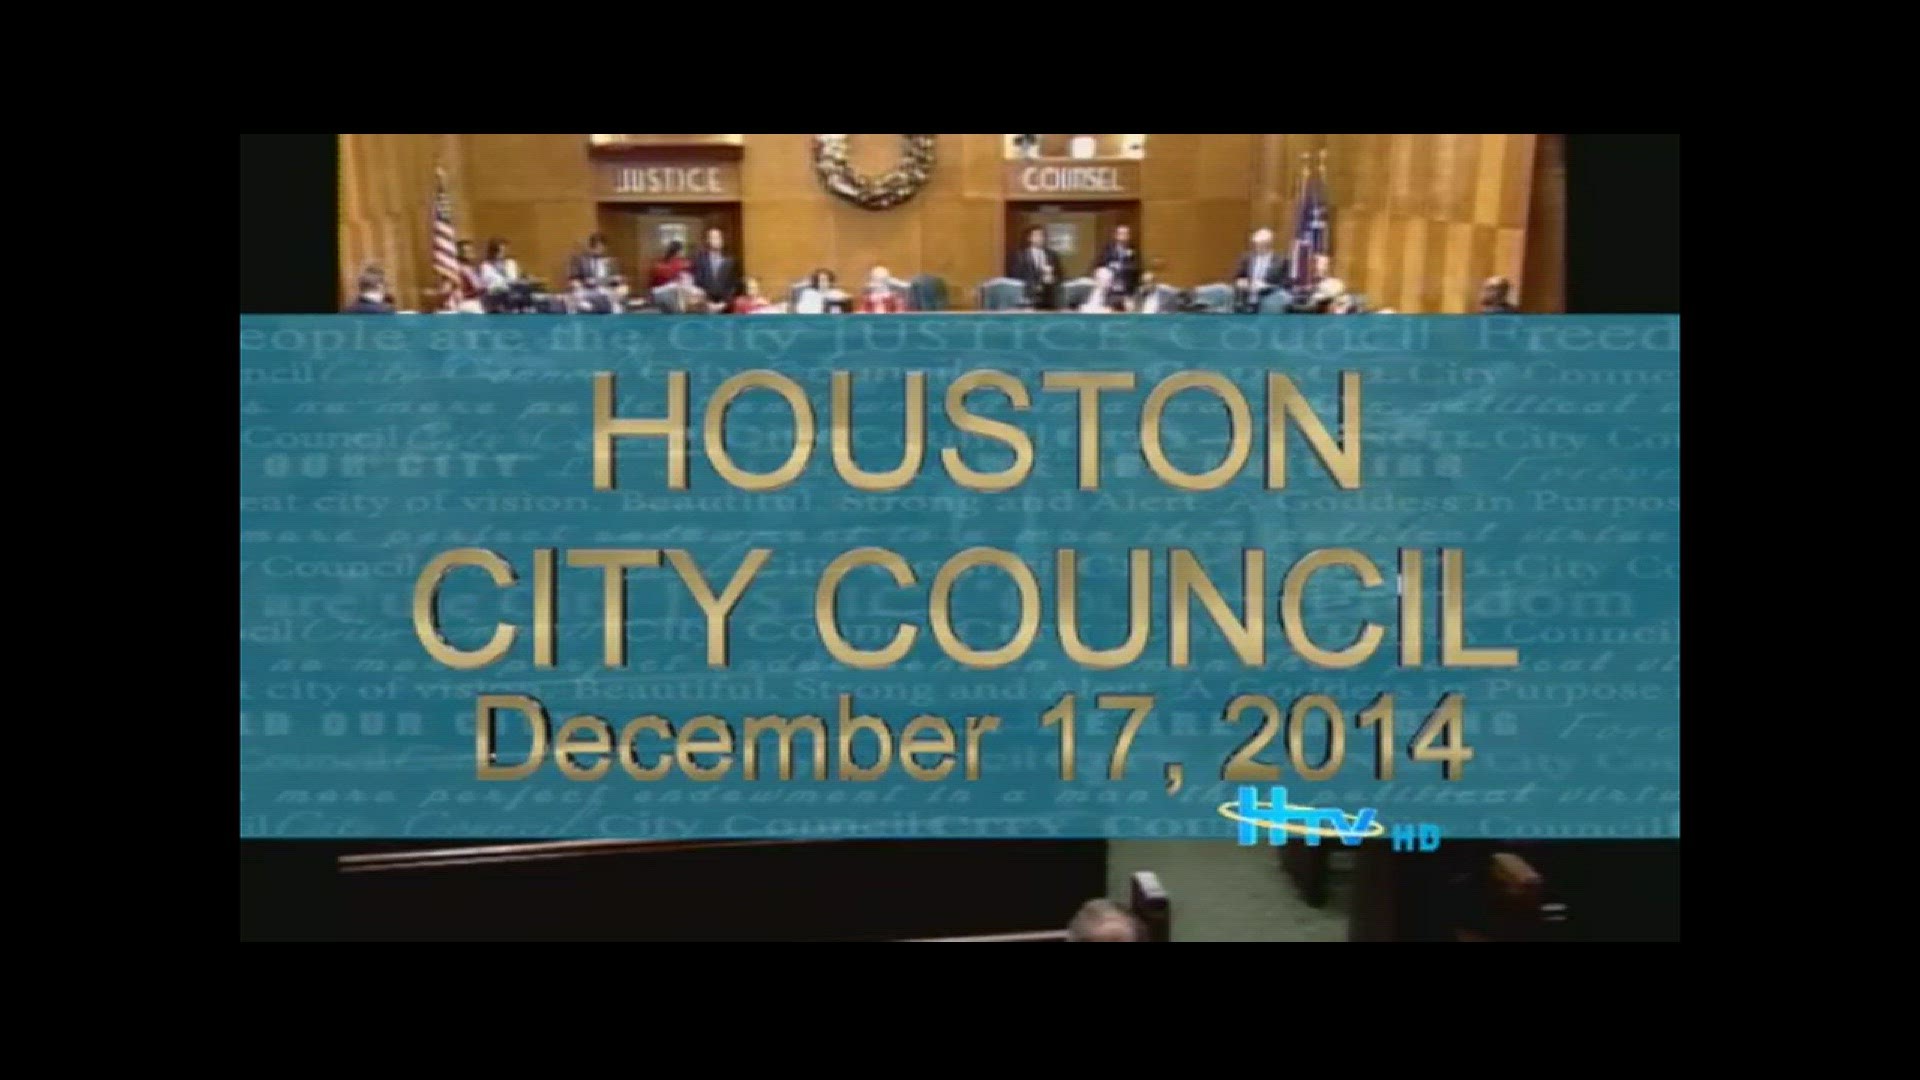 Houston City Council Members discuss the ability to retrieve body camera footage in a meeting on Dec. 17, 2015